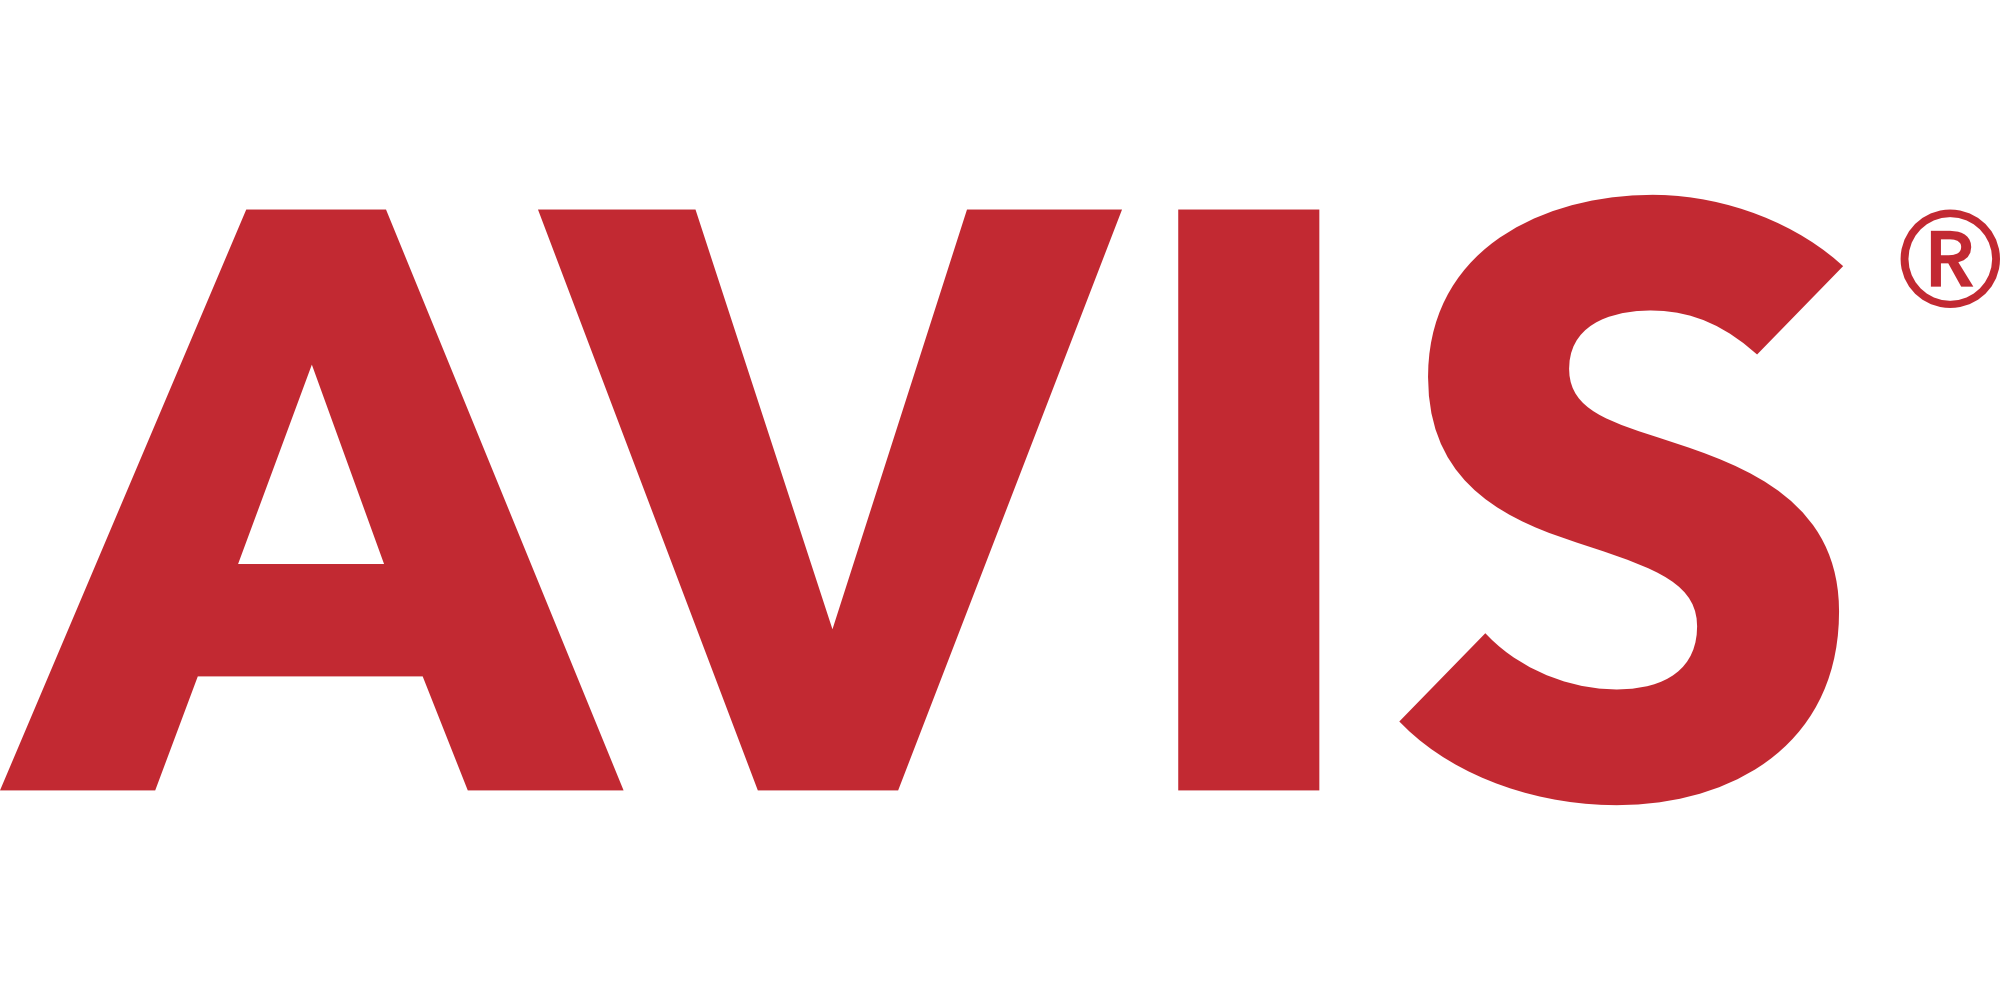 Avis Car Sales specializing in pre-owned vehicle sales in Wisconsin